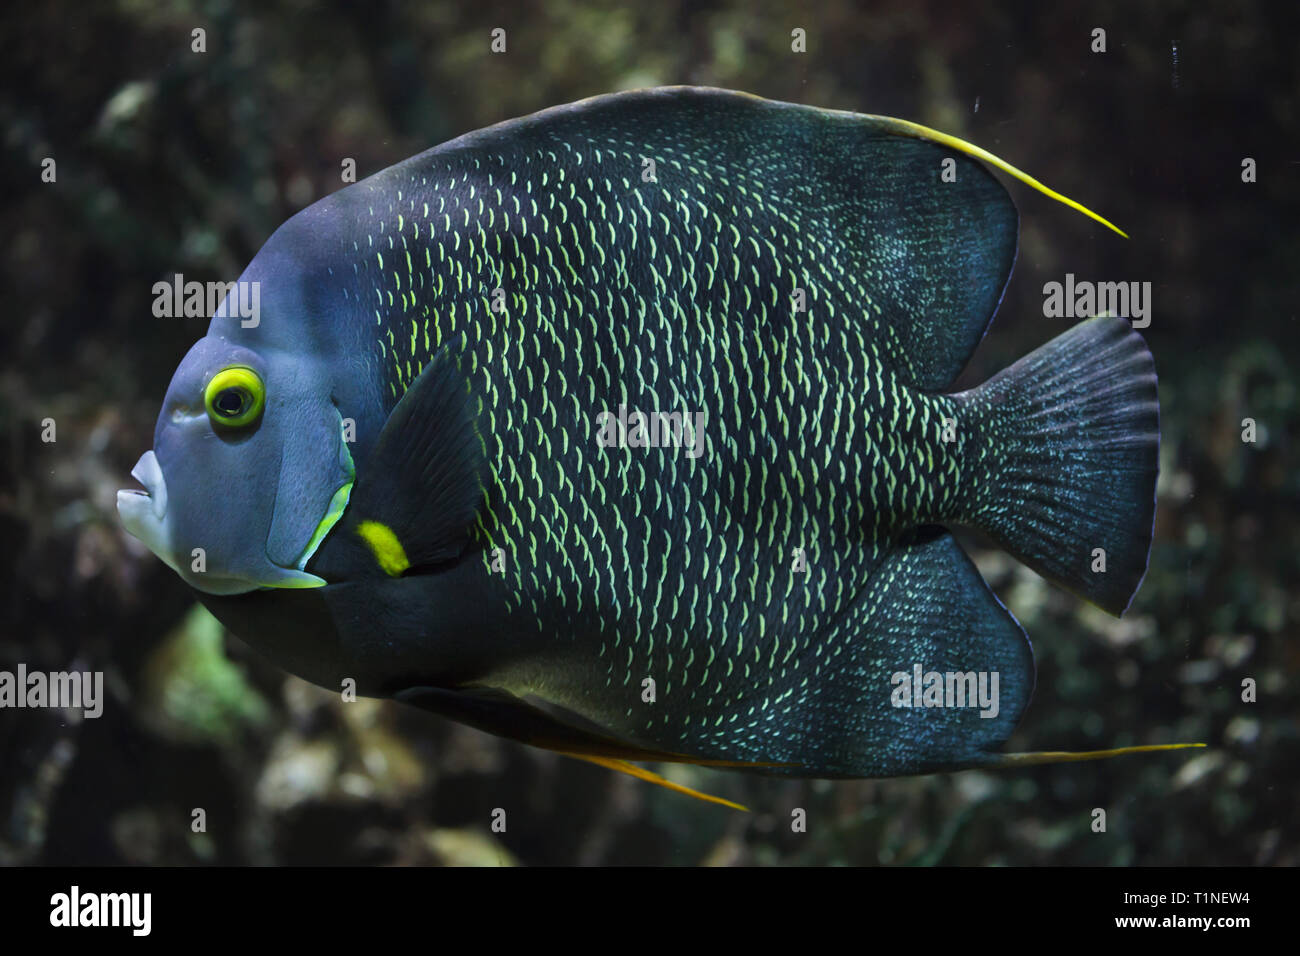 French angelfish (Pomacanthus paru). Tropical fish. Stock Photo